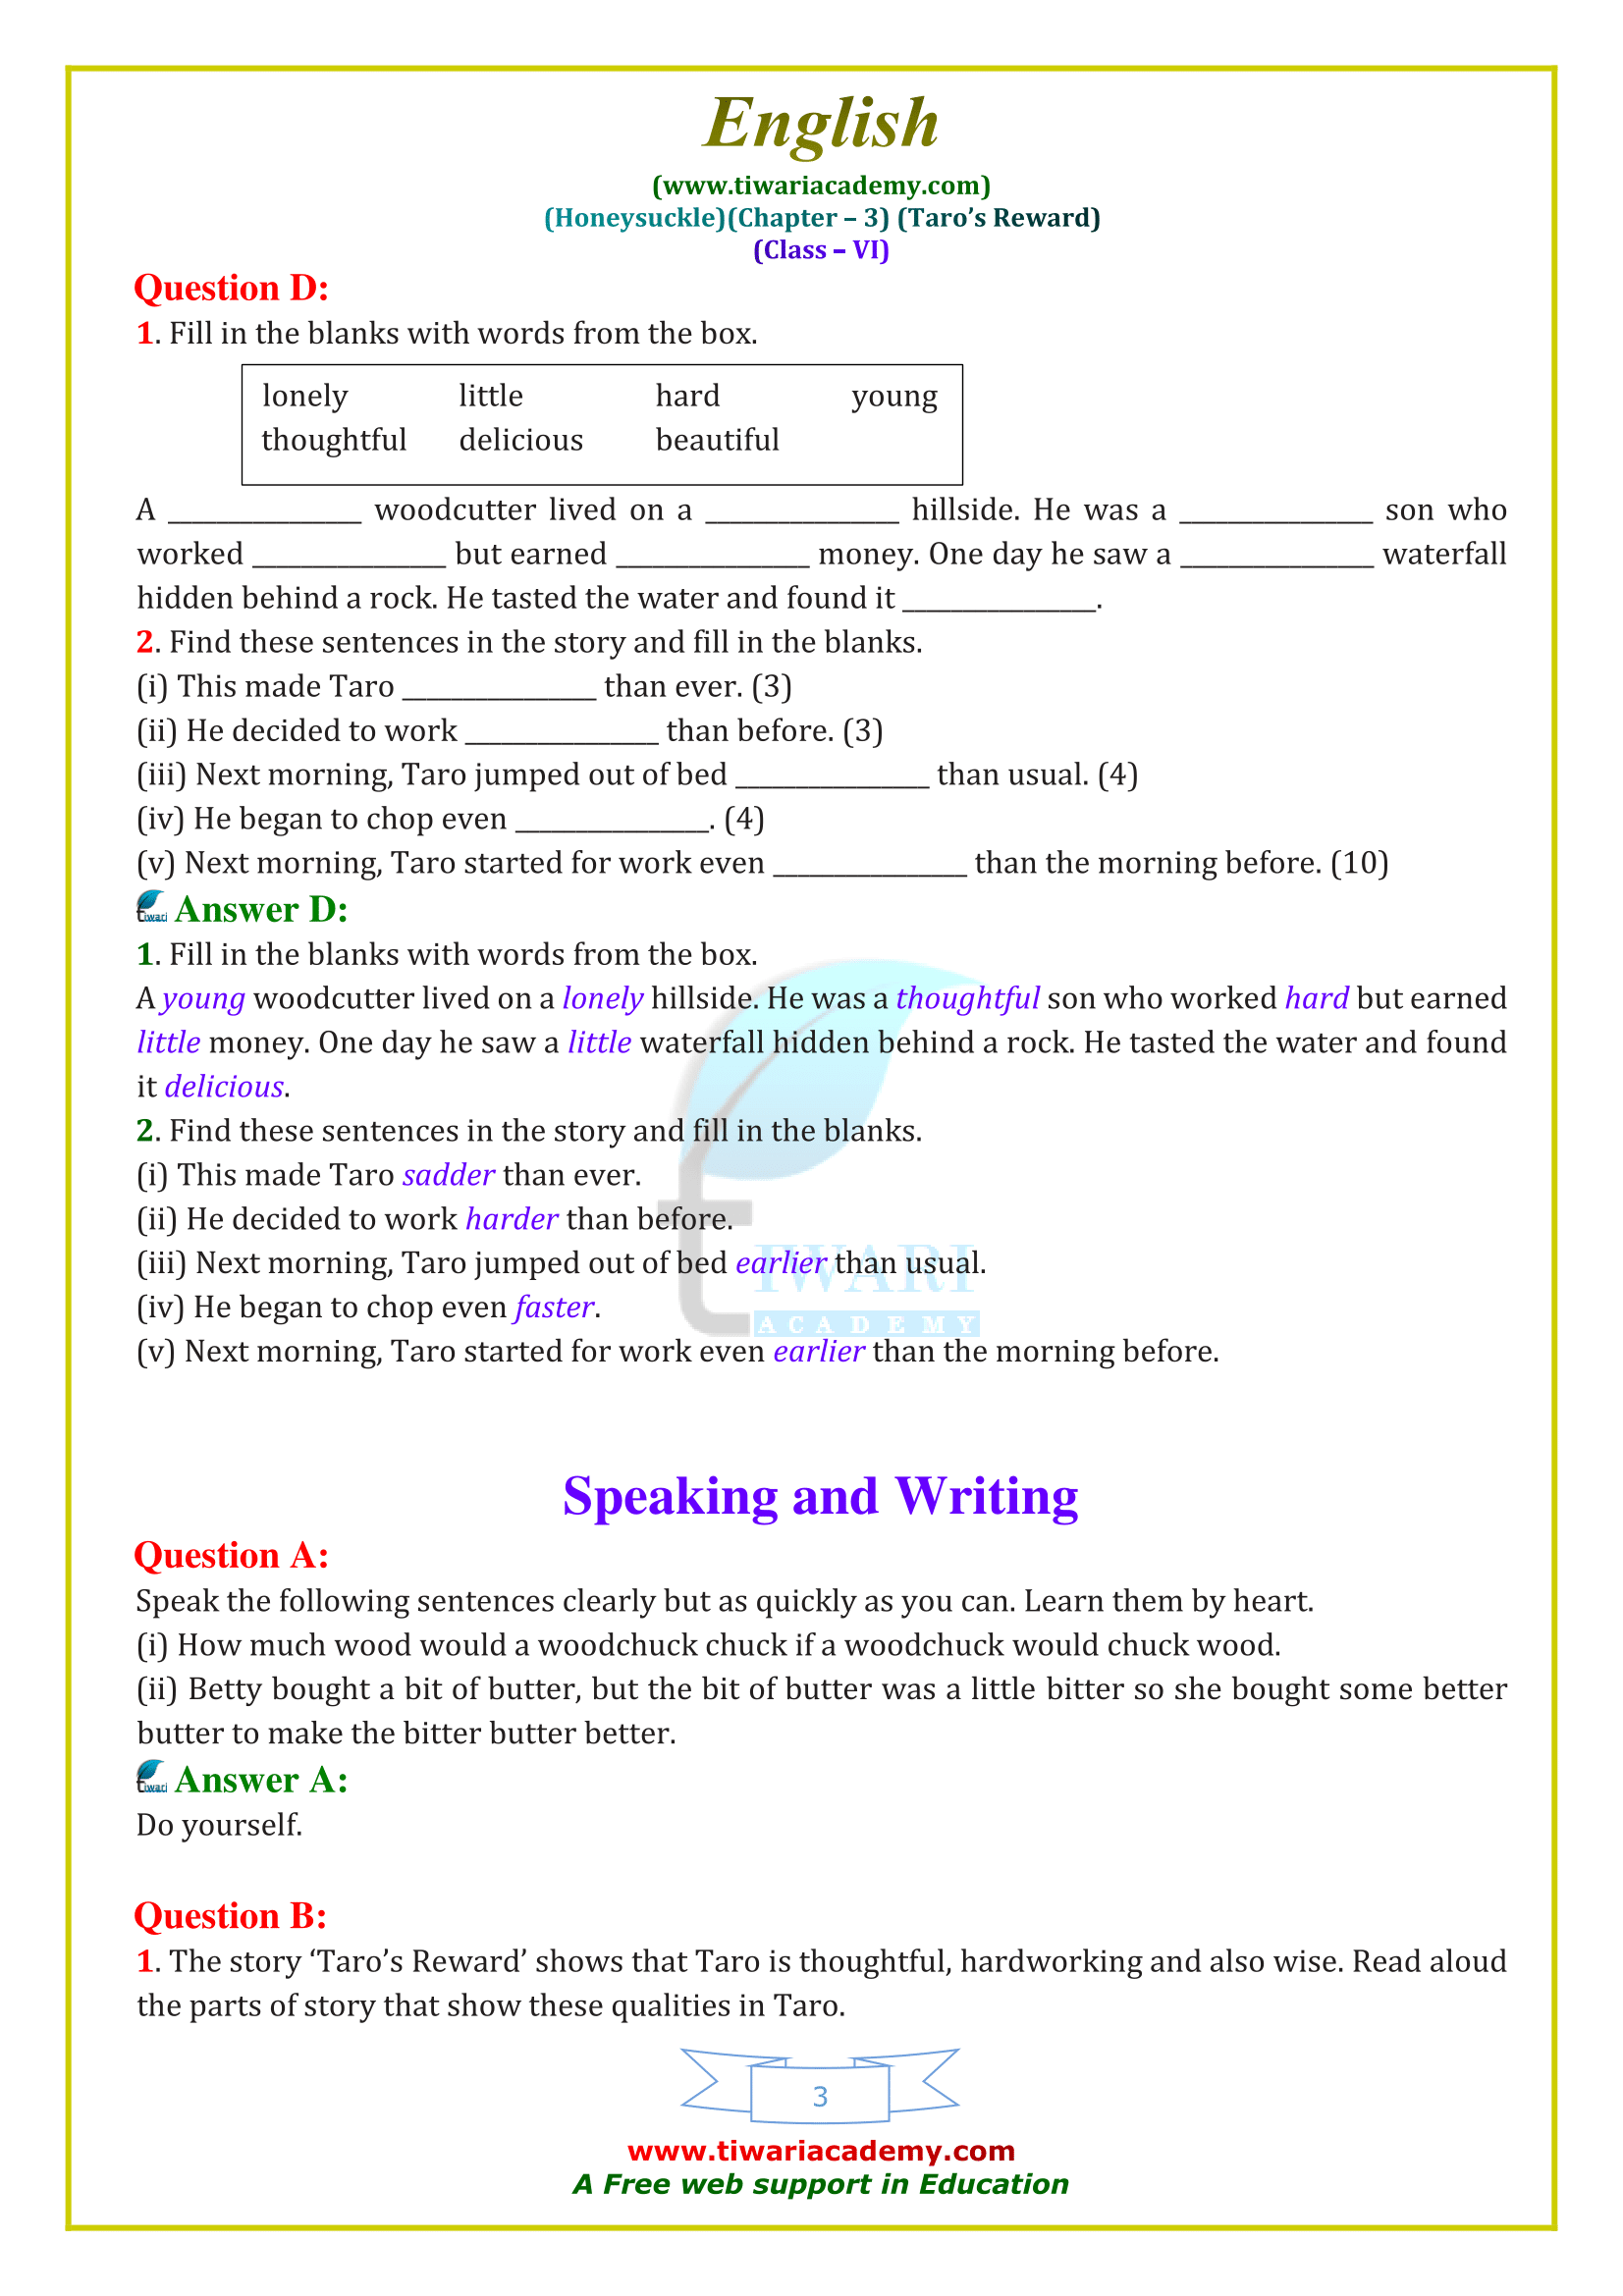 NCERT Solutions for Class 6 English Honeysuckle Chapter 3 with poem answers